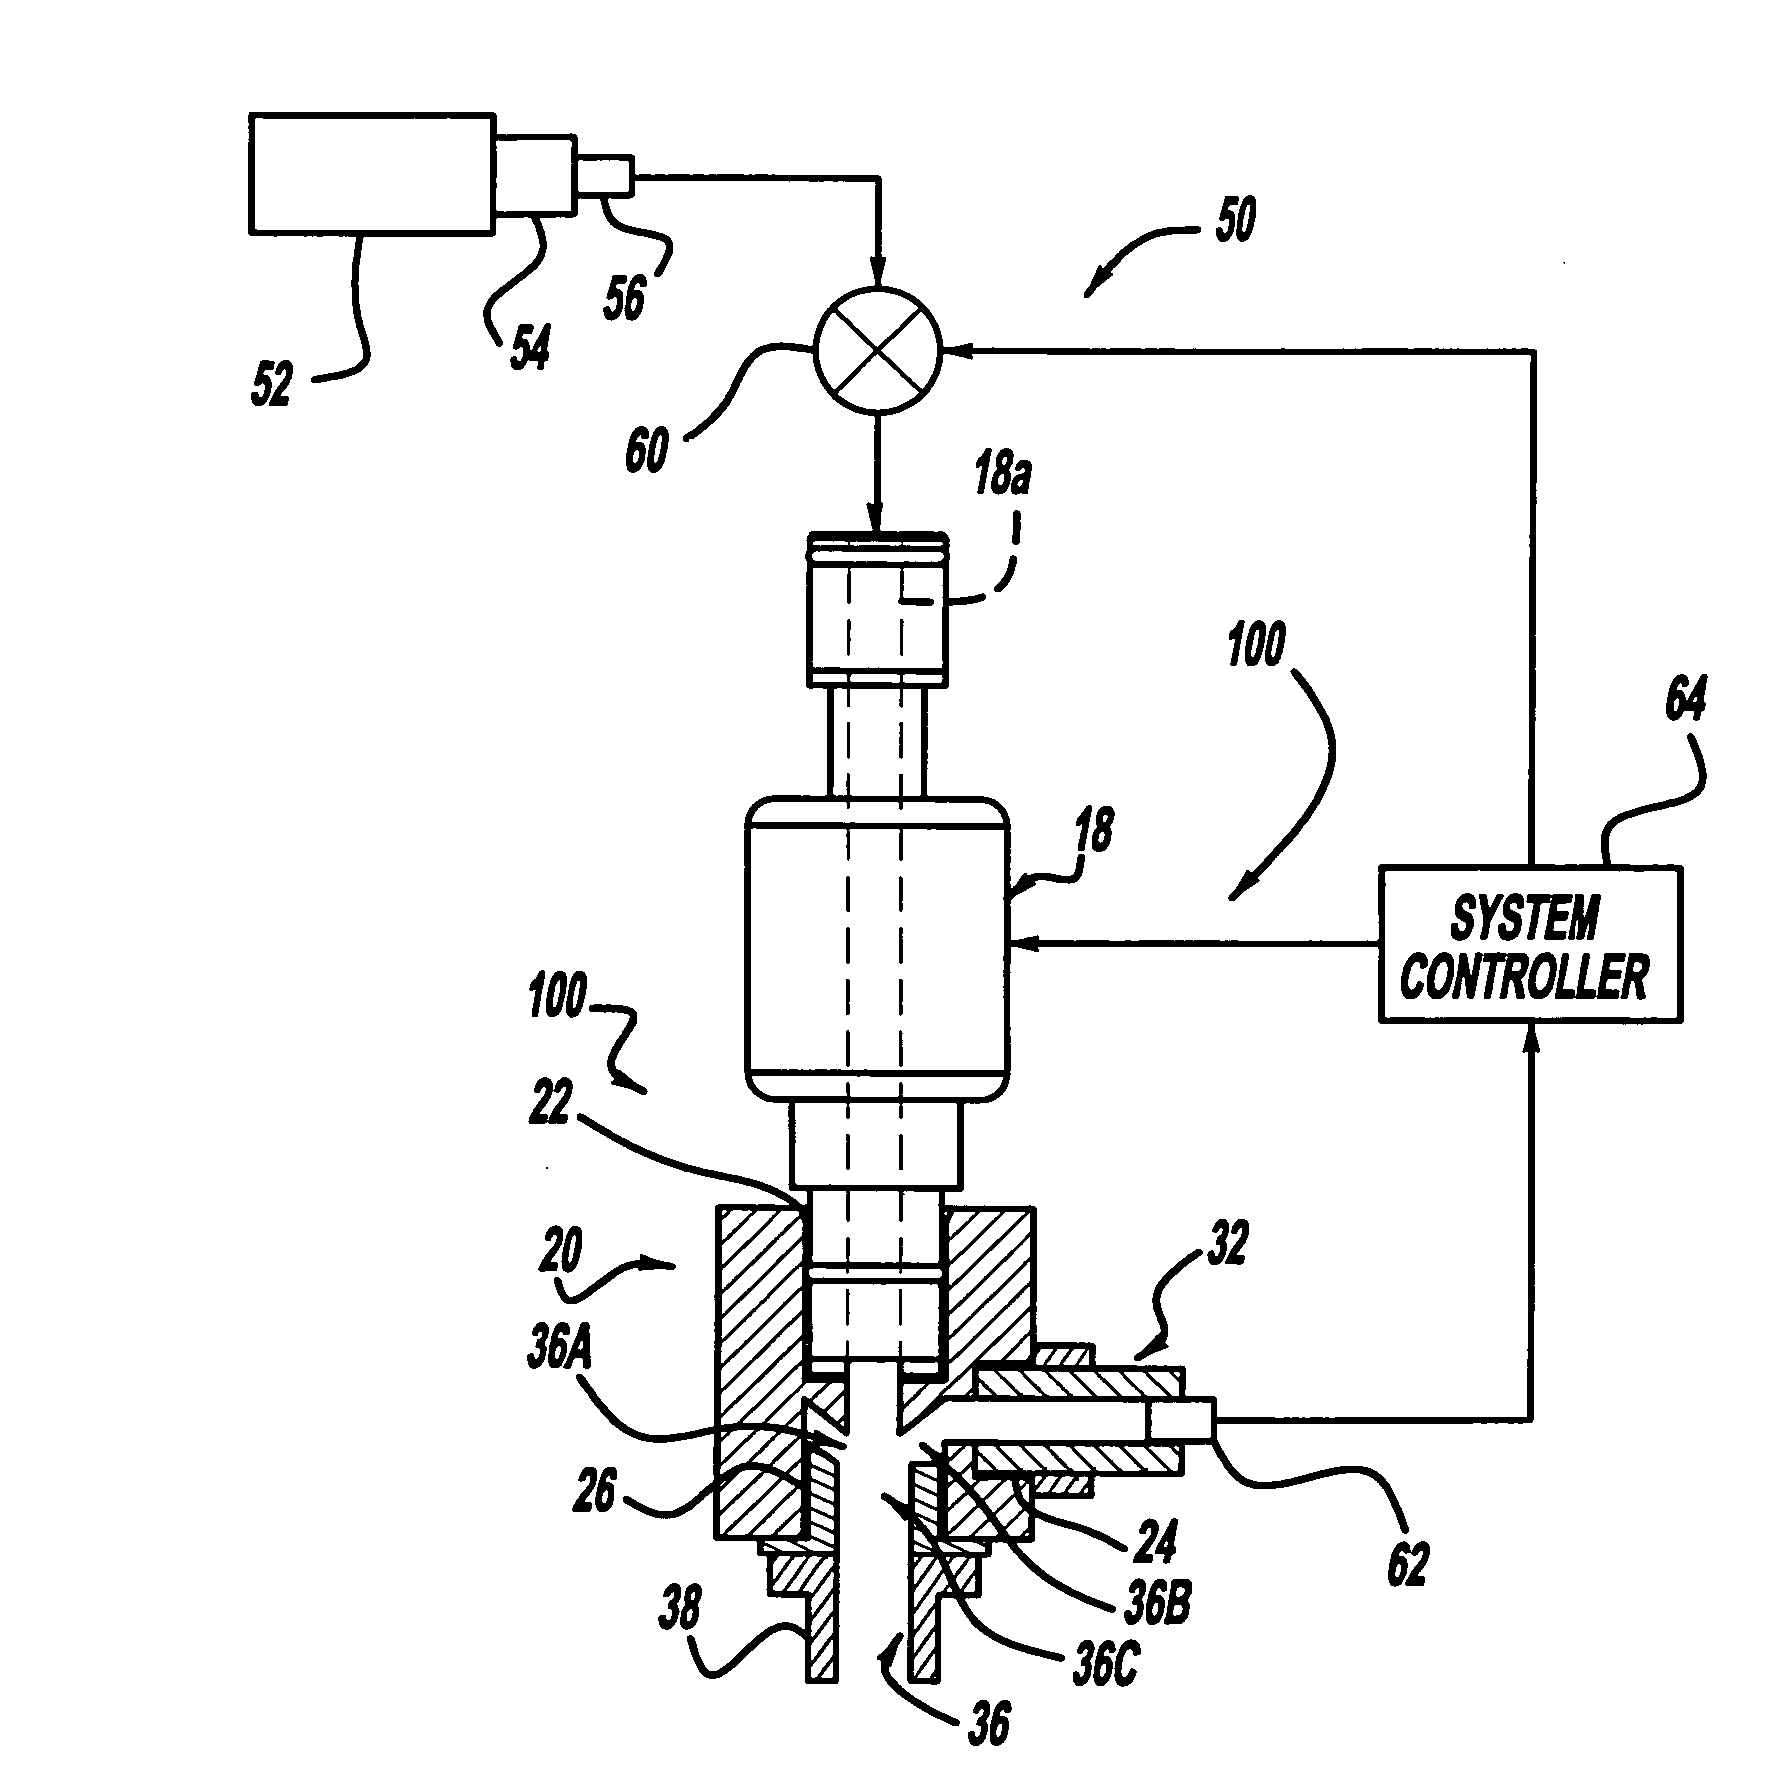 Combination of injector-ejector for fuel cell systems